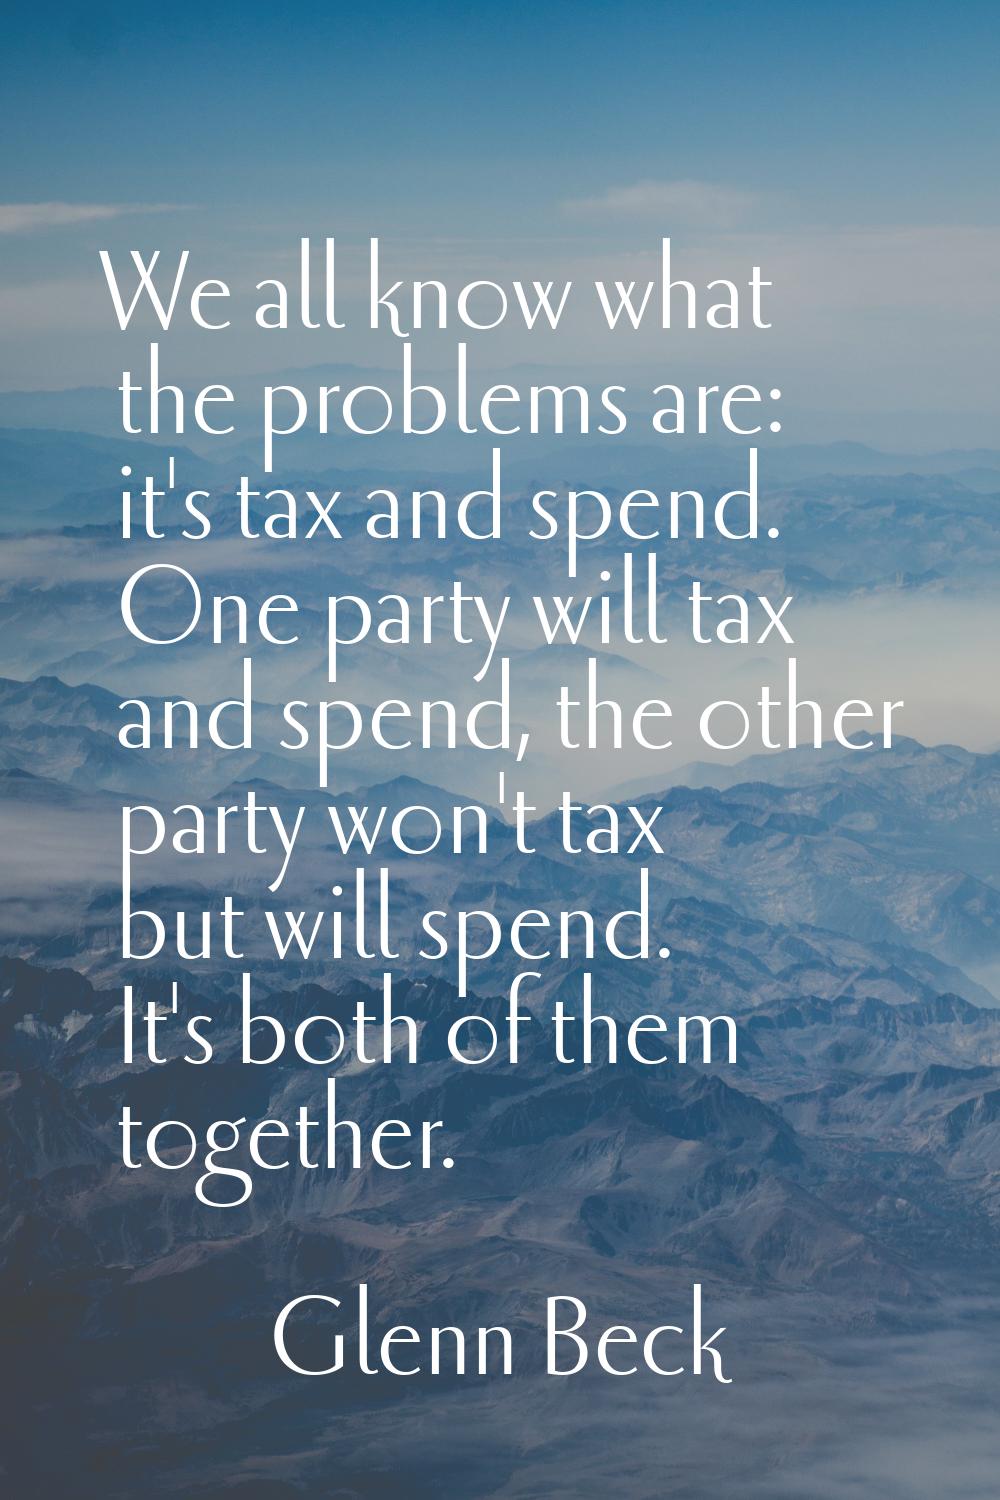 We all know what the problems are: it's tax and spend. One party will tax and spend, the other part